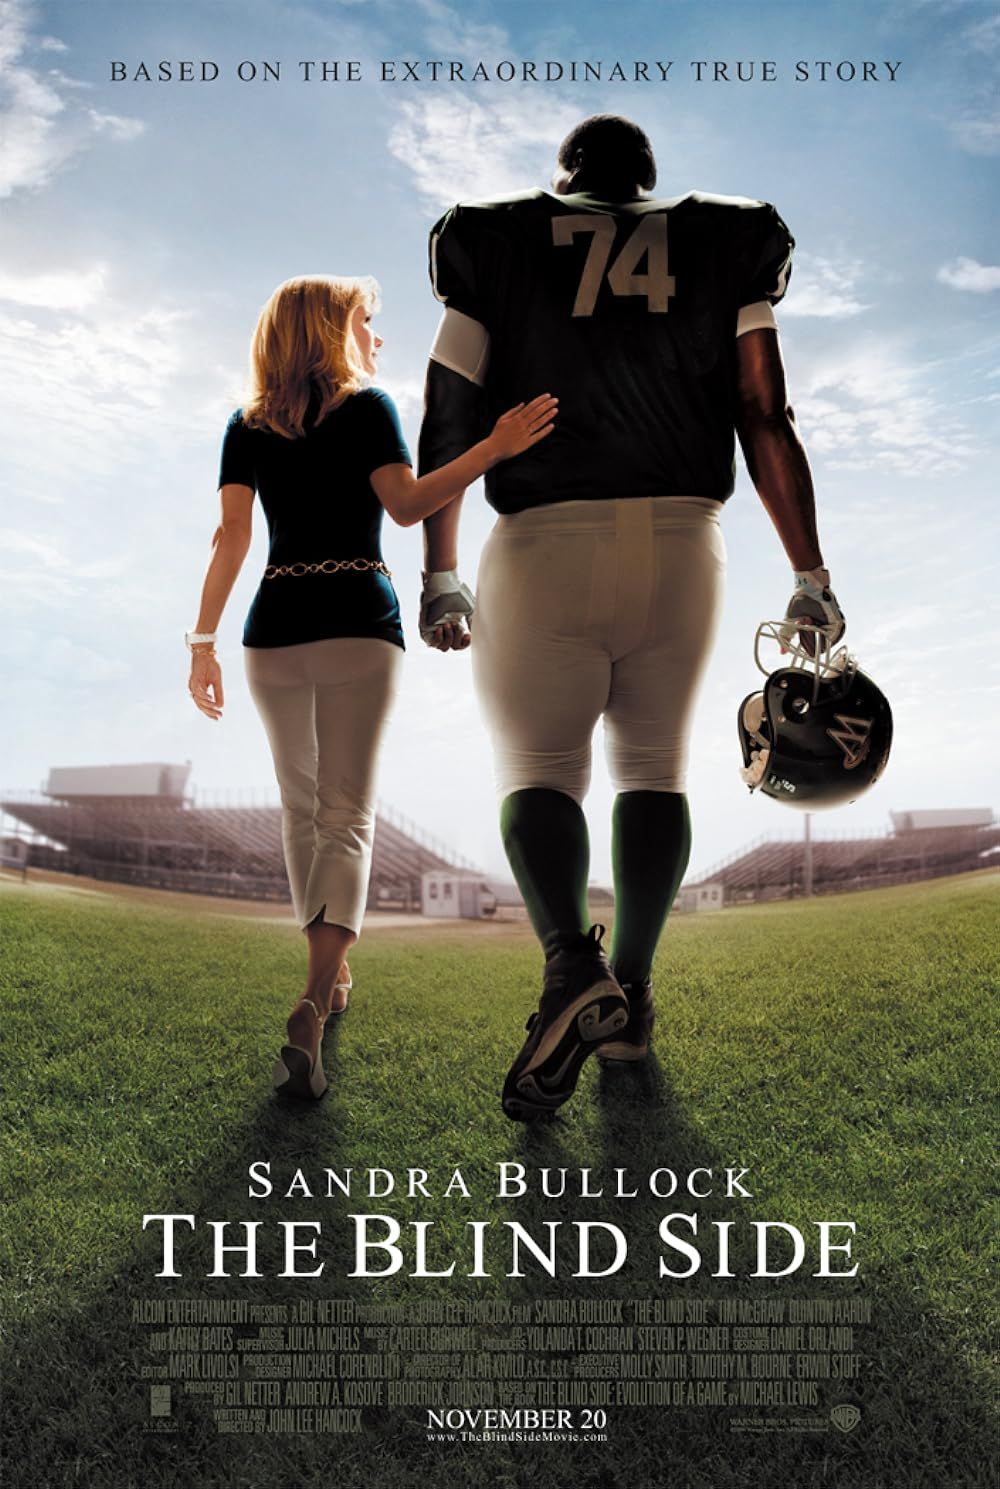 Sandra Bullock and Quinton Aaron walk together on the poster for The Blind Side